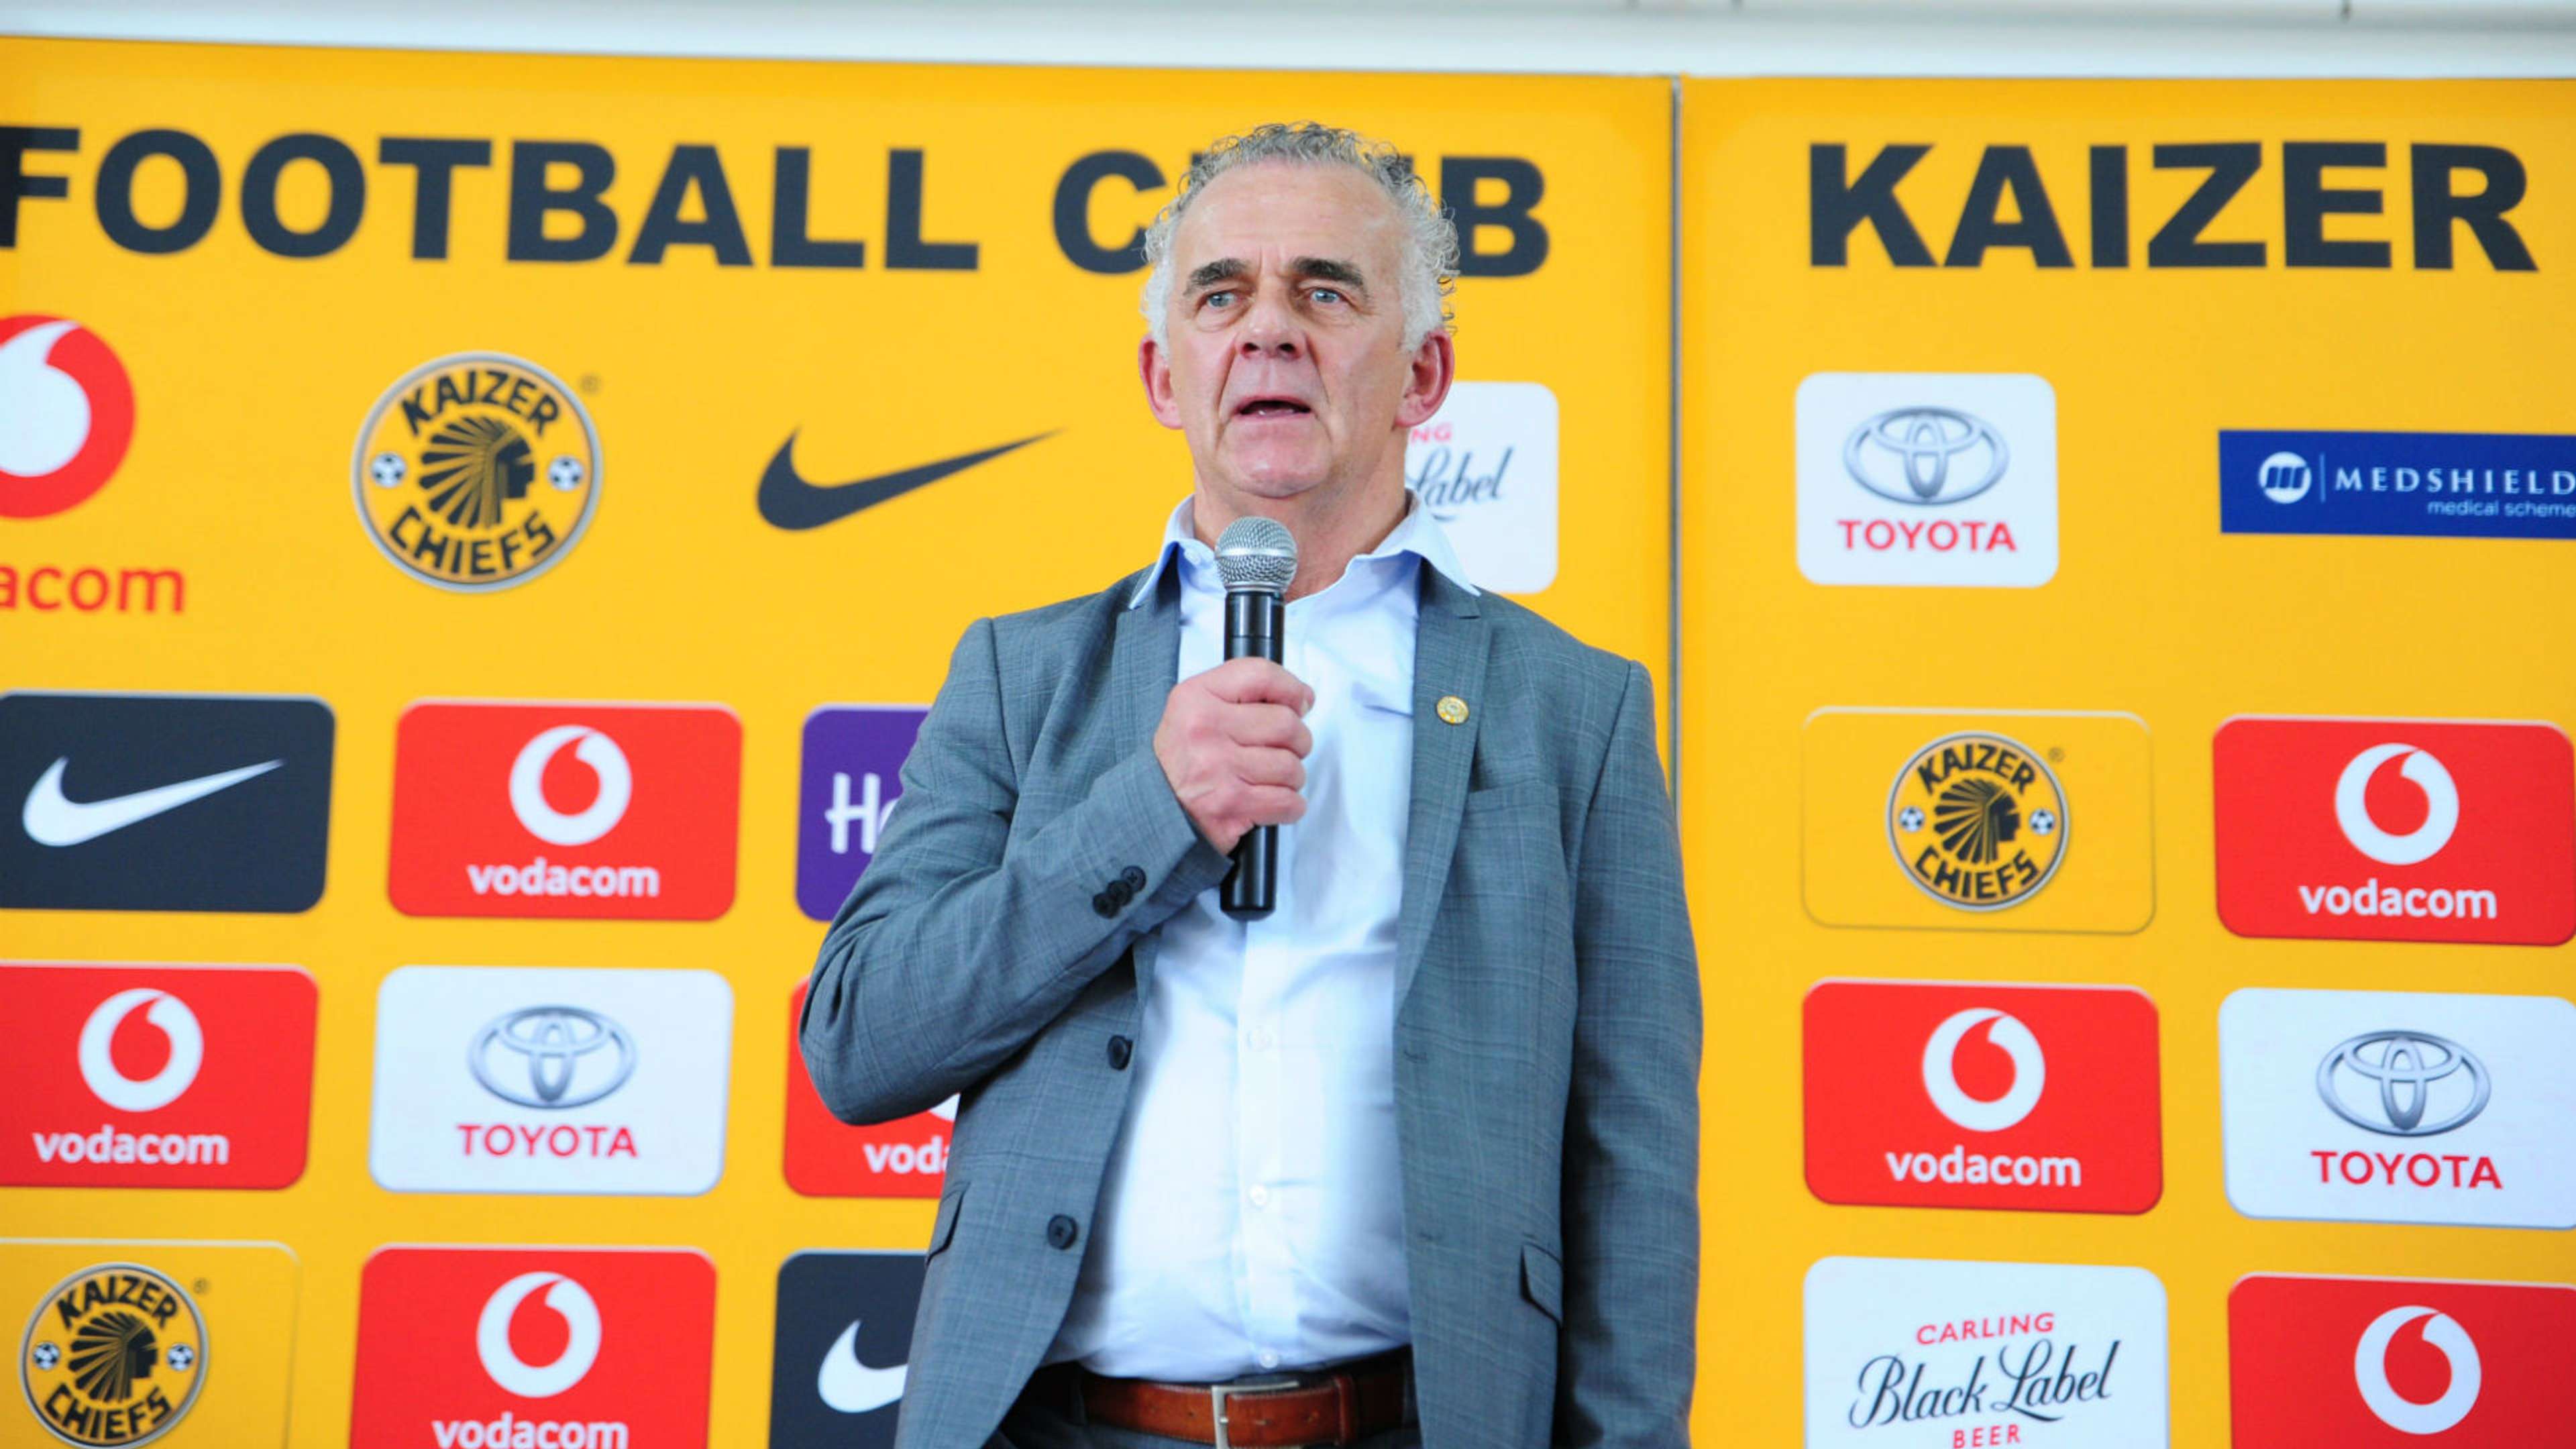 Rob Hutting of Kaizer Chiefs